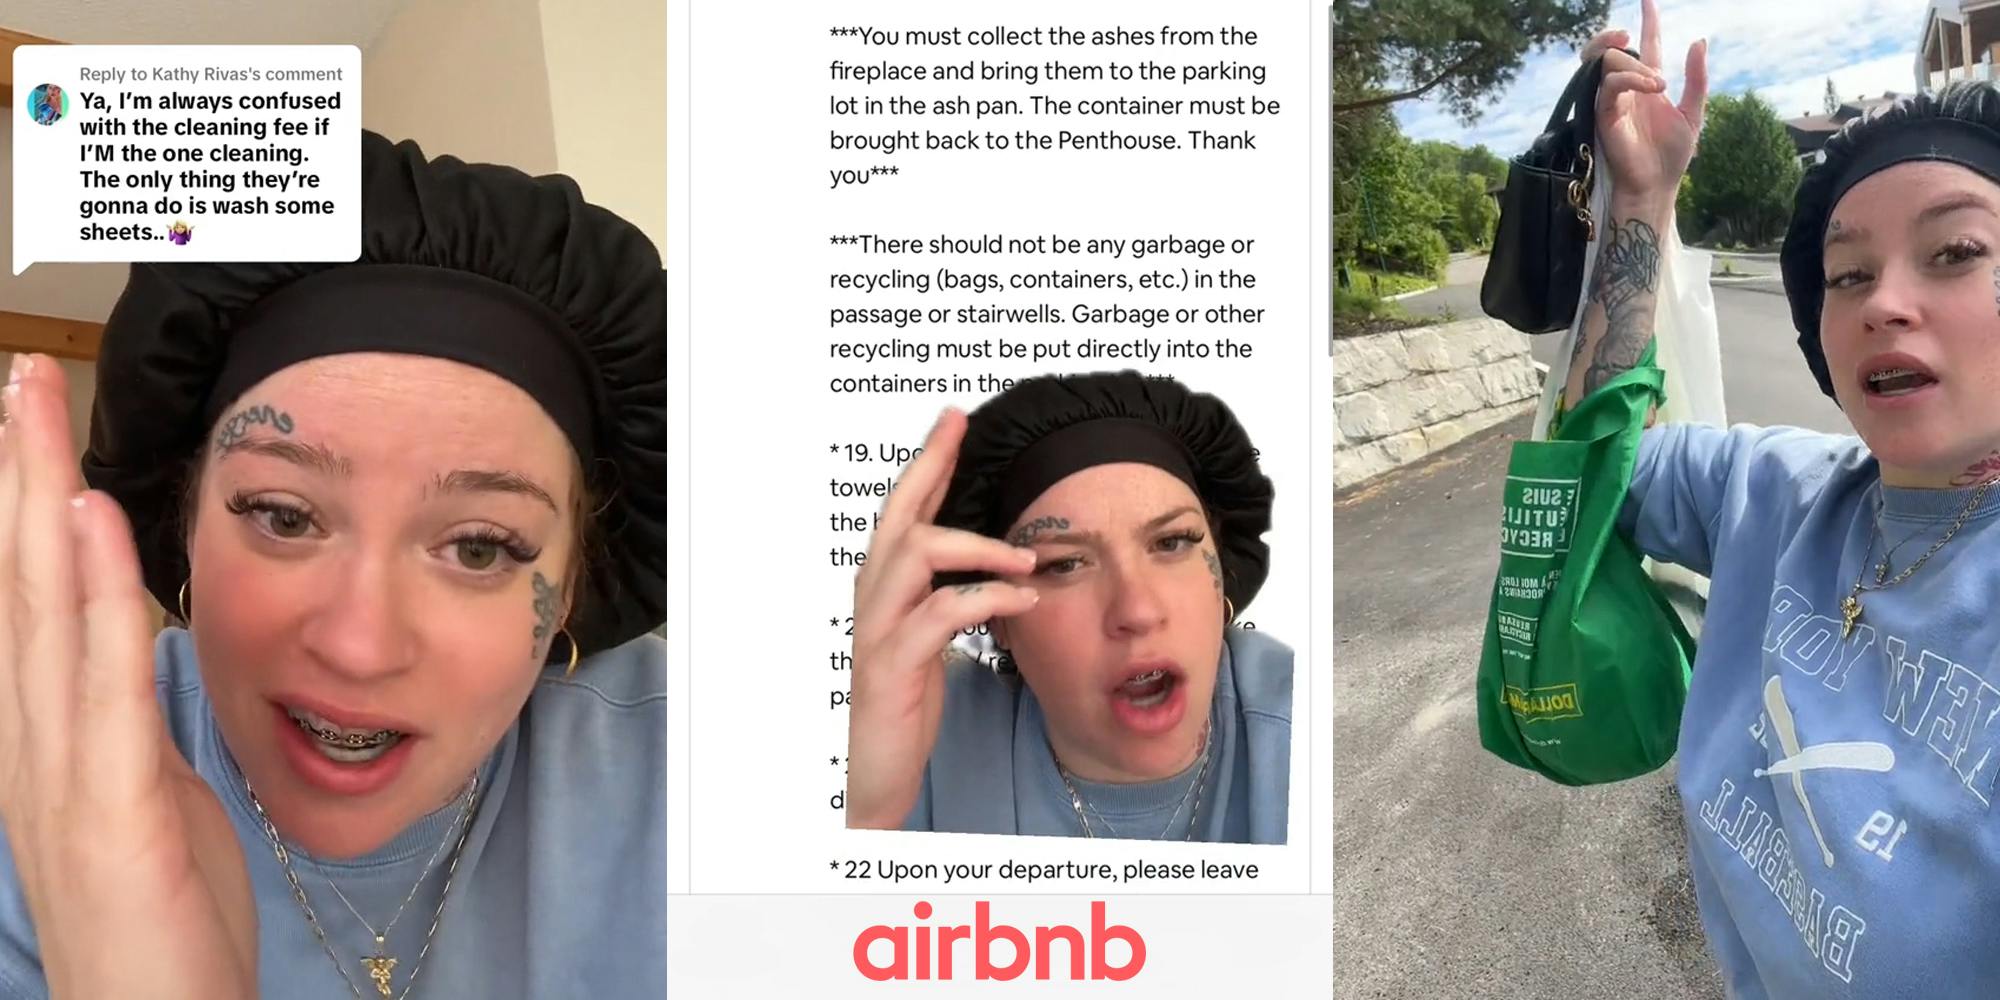 Airbnb guest speaking with caption "Ya, I'm always confused with the cleaning fee if I'm the one cleaning... (l) Airbnb guest greenscreen TikTok over email from Airbnb owner with Airbnb logo at the bottom (c) Airbnb guest taking out trash (r)